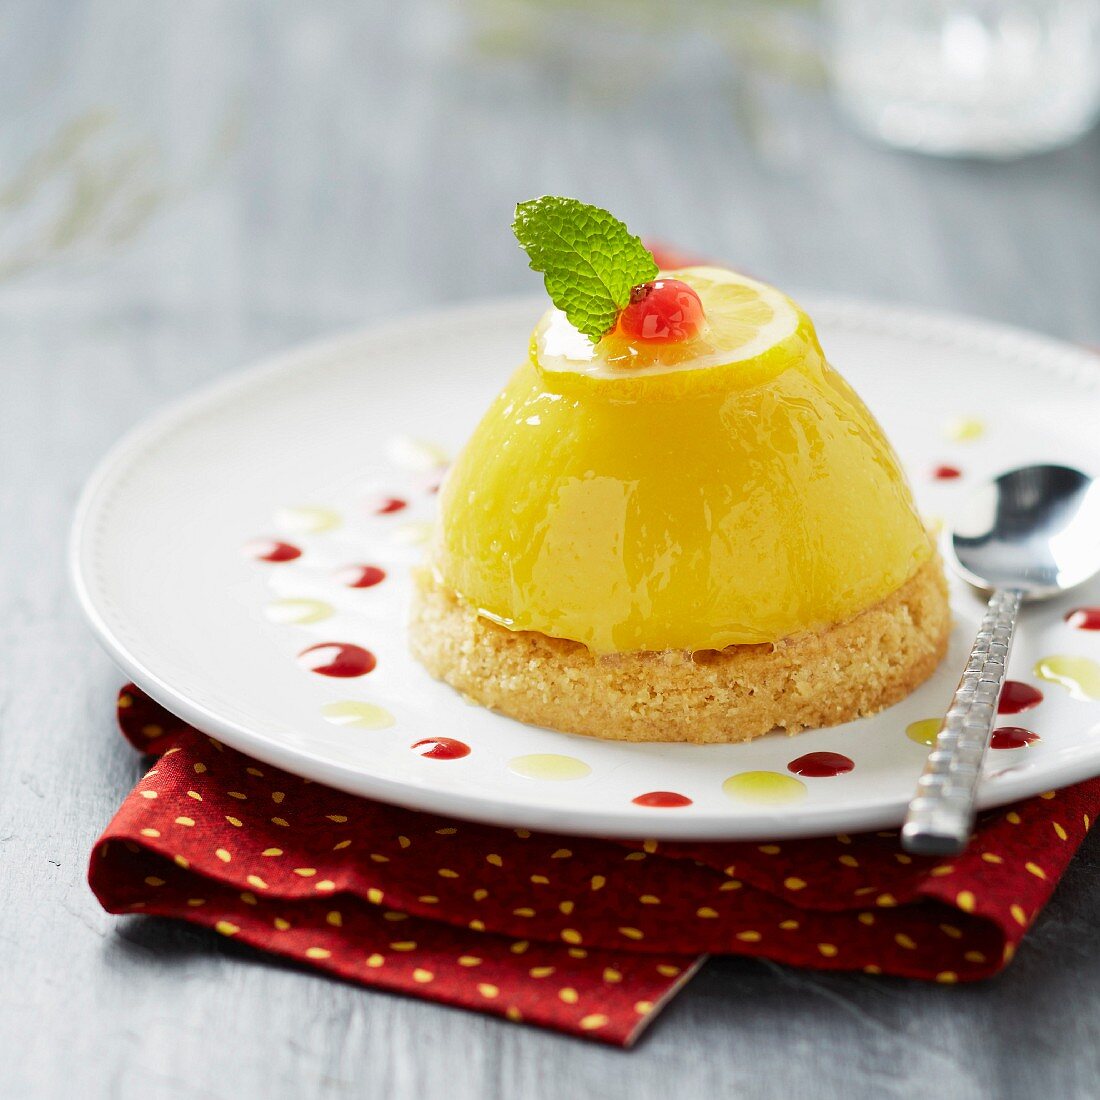 Lemon curd and shortbread pudding